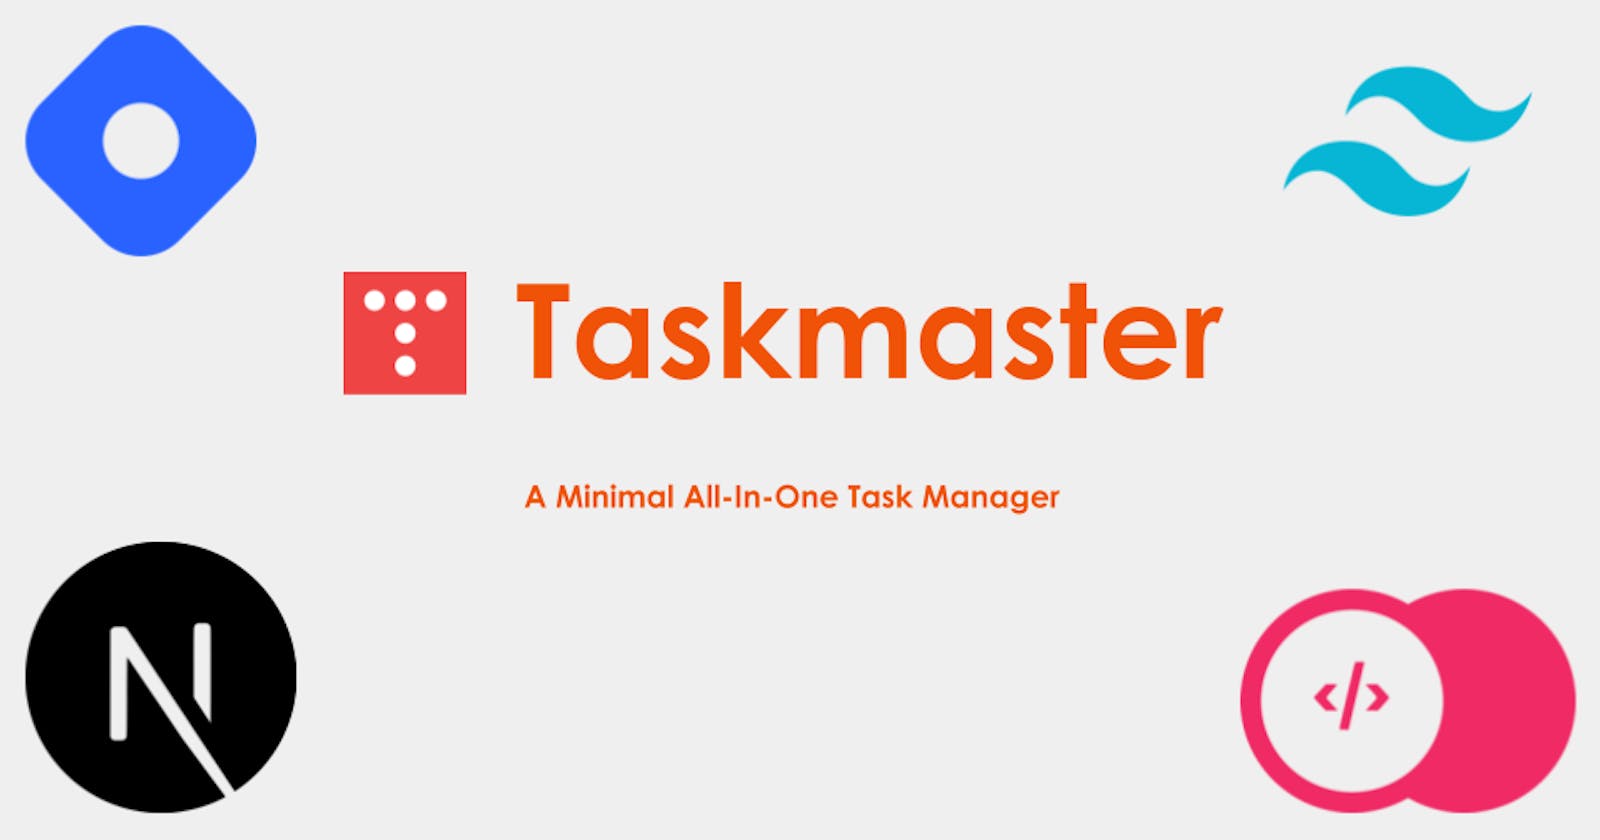 Introducing Taskmaster: A Minimal All-In-One Task Management Tool